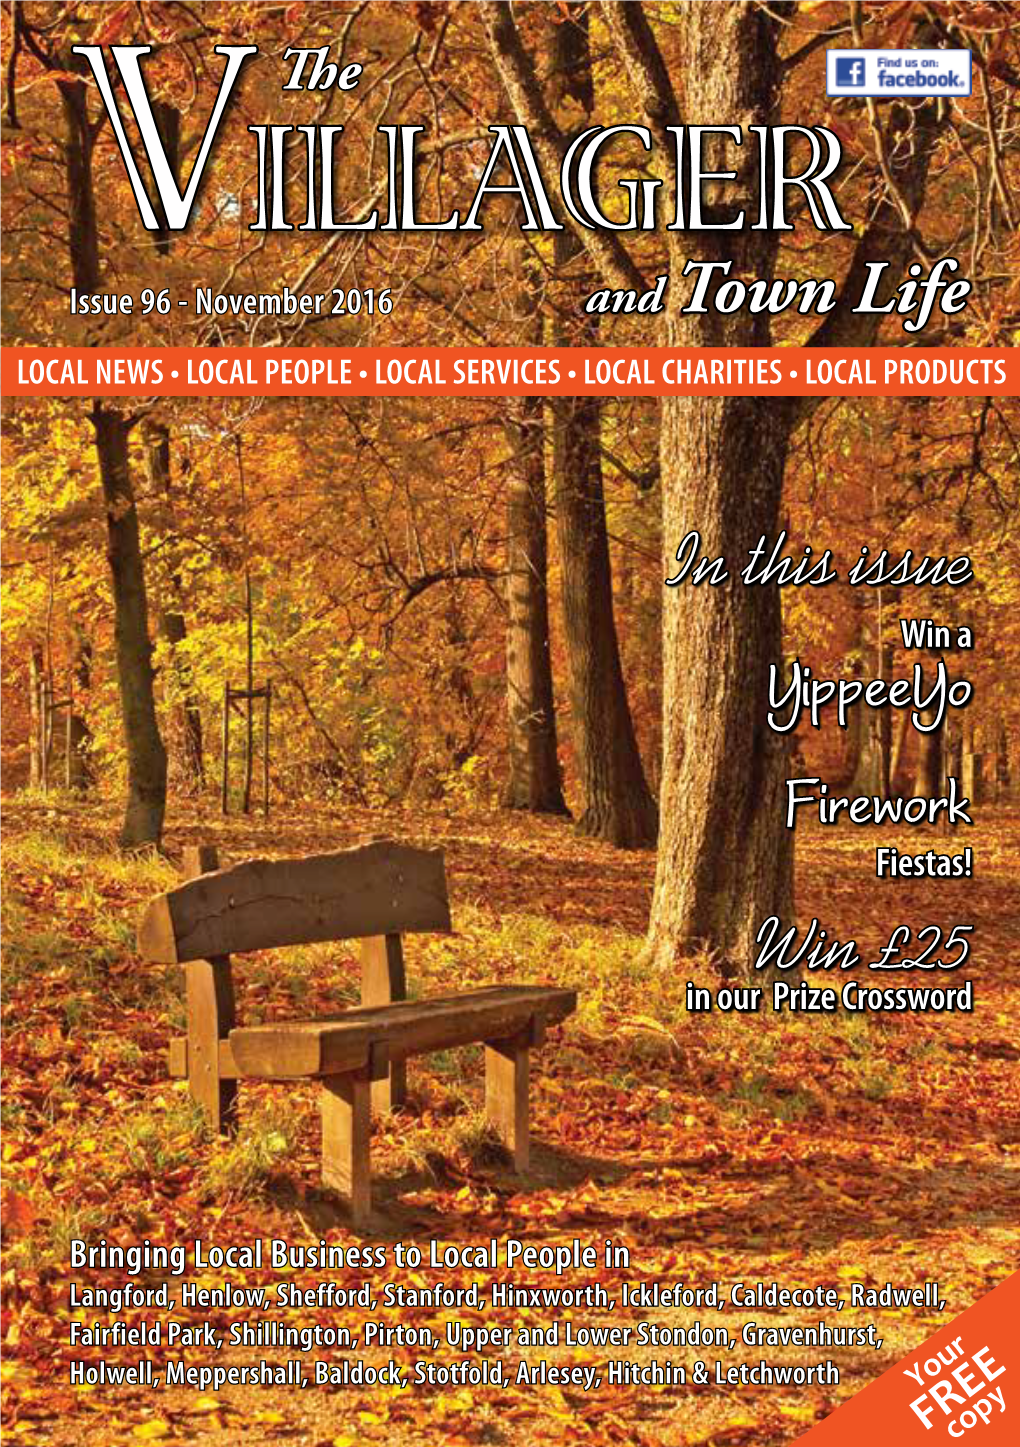 VILLAGER Issue 96 - November 2016 and Town Life LOCAL NEWS • LOCAL PEOPLE • LOCAL SERVICES • LOCAL CHARITIES • LOCAL PRODUCTS